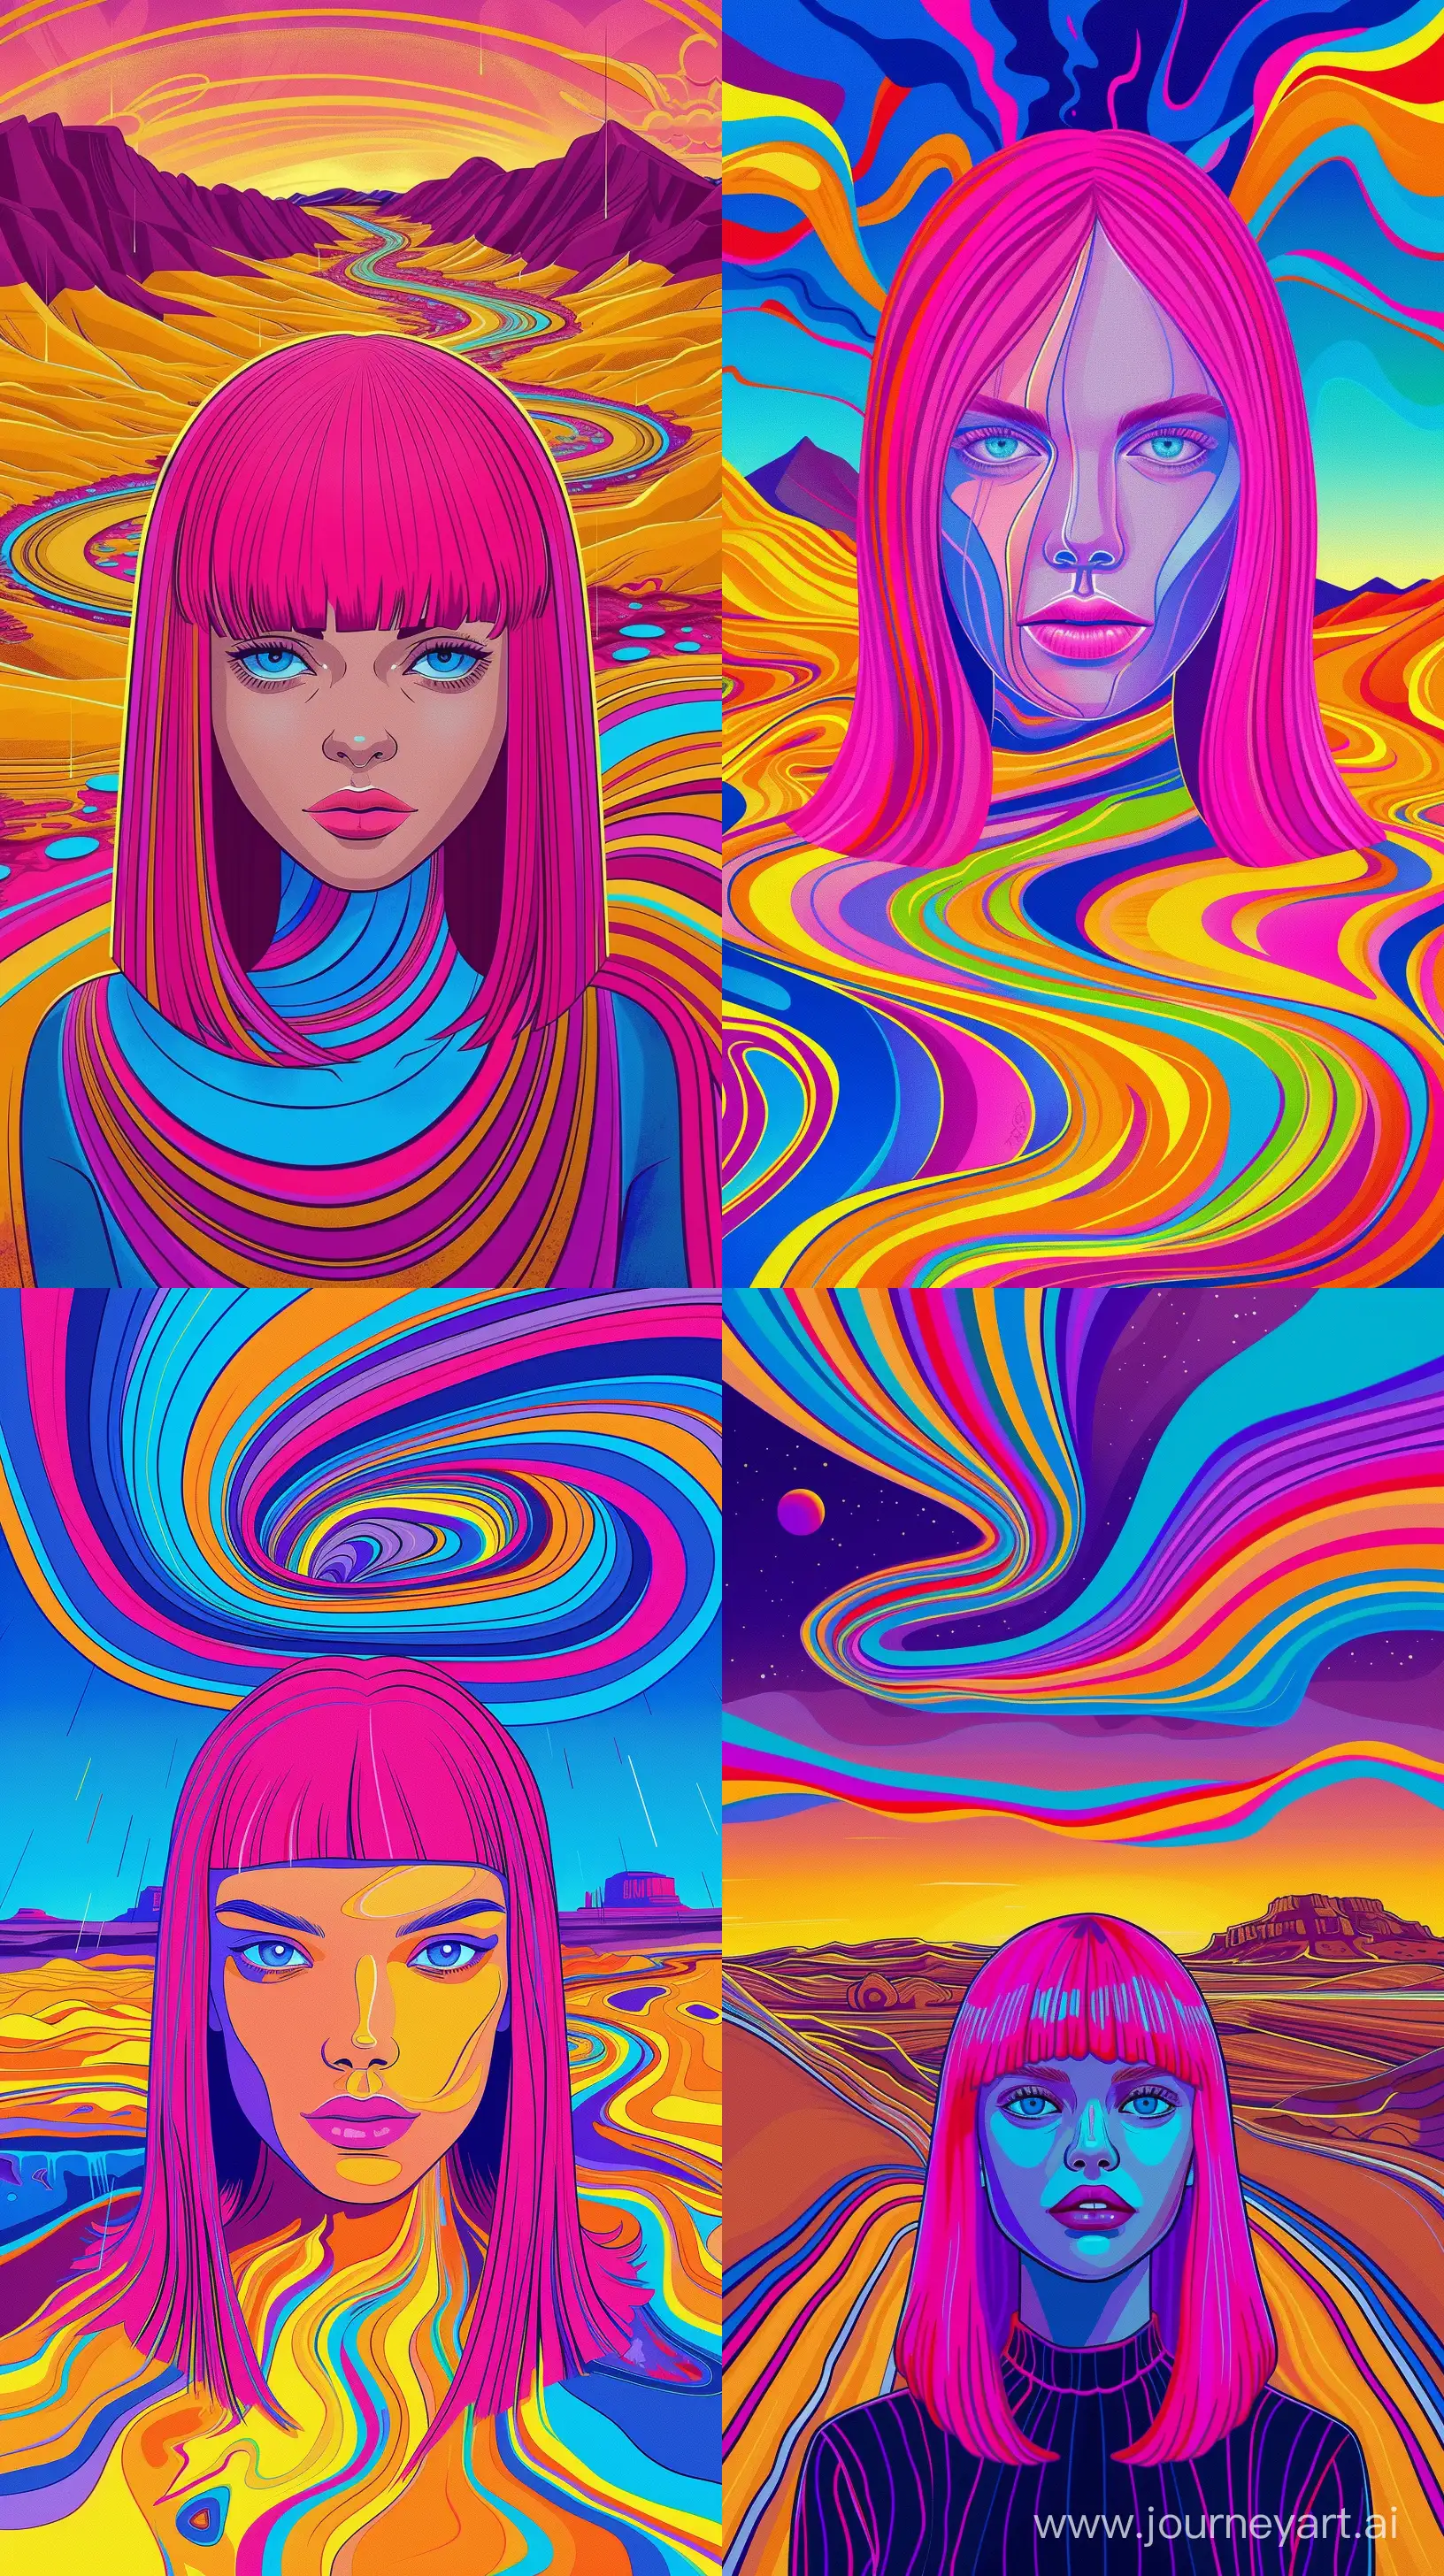 Hyperintense colorblast the complexity and interconnectedness of the Desert after Rain,Morning,Golden hour, with a supermodel girl, neon fuchsia straight shoulder length hair, blue eyes, symmetrical face, vibrant and swirling lines representing the landscape. The colors used are bold and saturated, evoking a sense of energy and vitality. Art Form/Style: Digital illustration with abstract and surreal elements, using bold and contrasting colors to create visual impact. Artist References: Georgia o'keeffe --ar 9:16